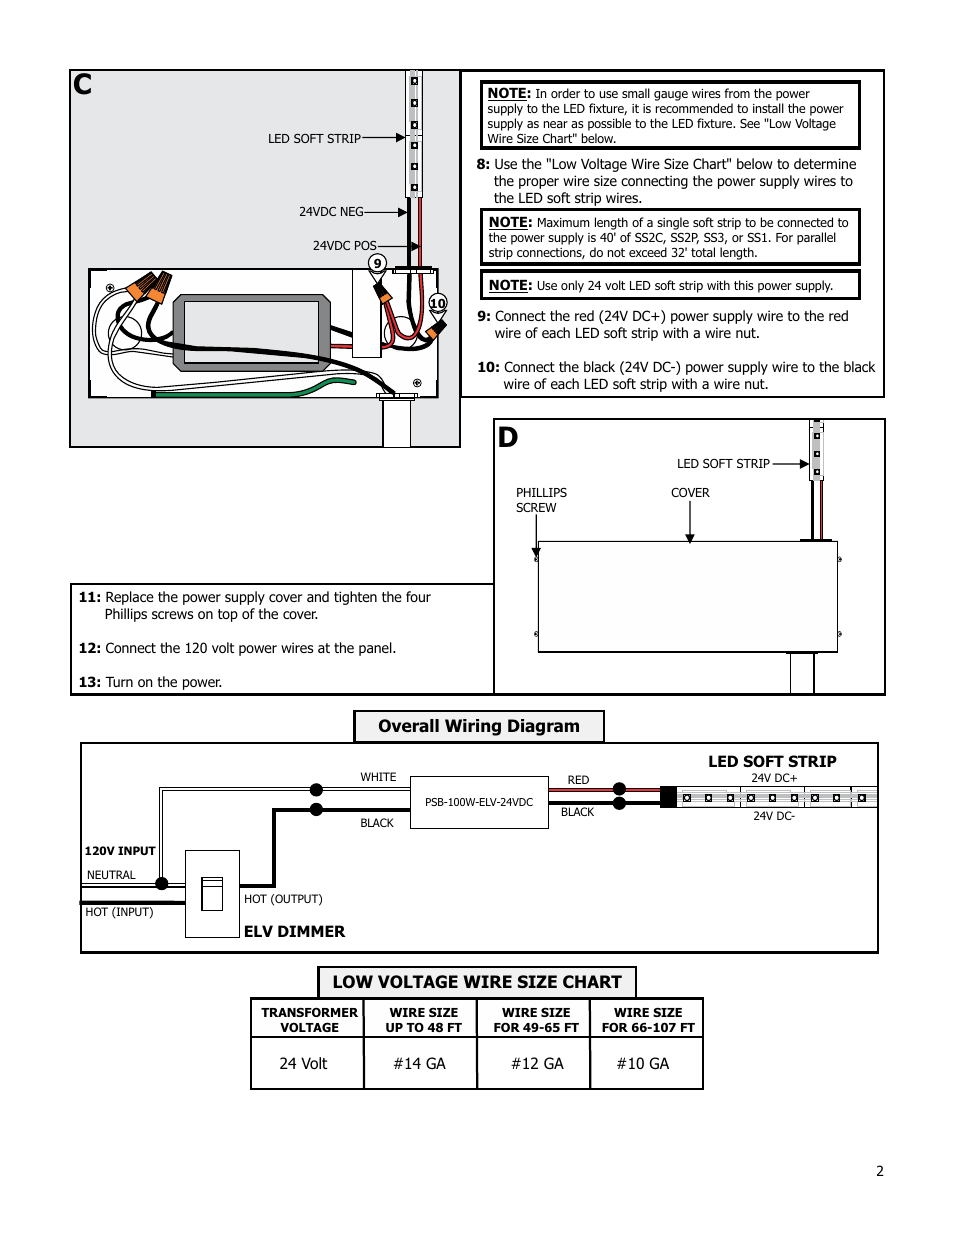 Overall wiring diagram, Low voltage wire size chart | Edge Lighting PSB-100W-ELV-24VDC, 96 Watt 24 Volt DC Power Supply User Manual | Page 2 / 2